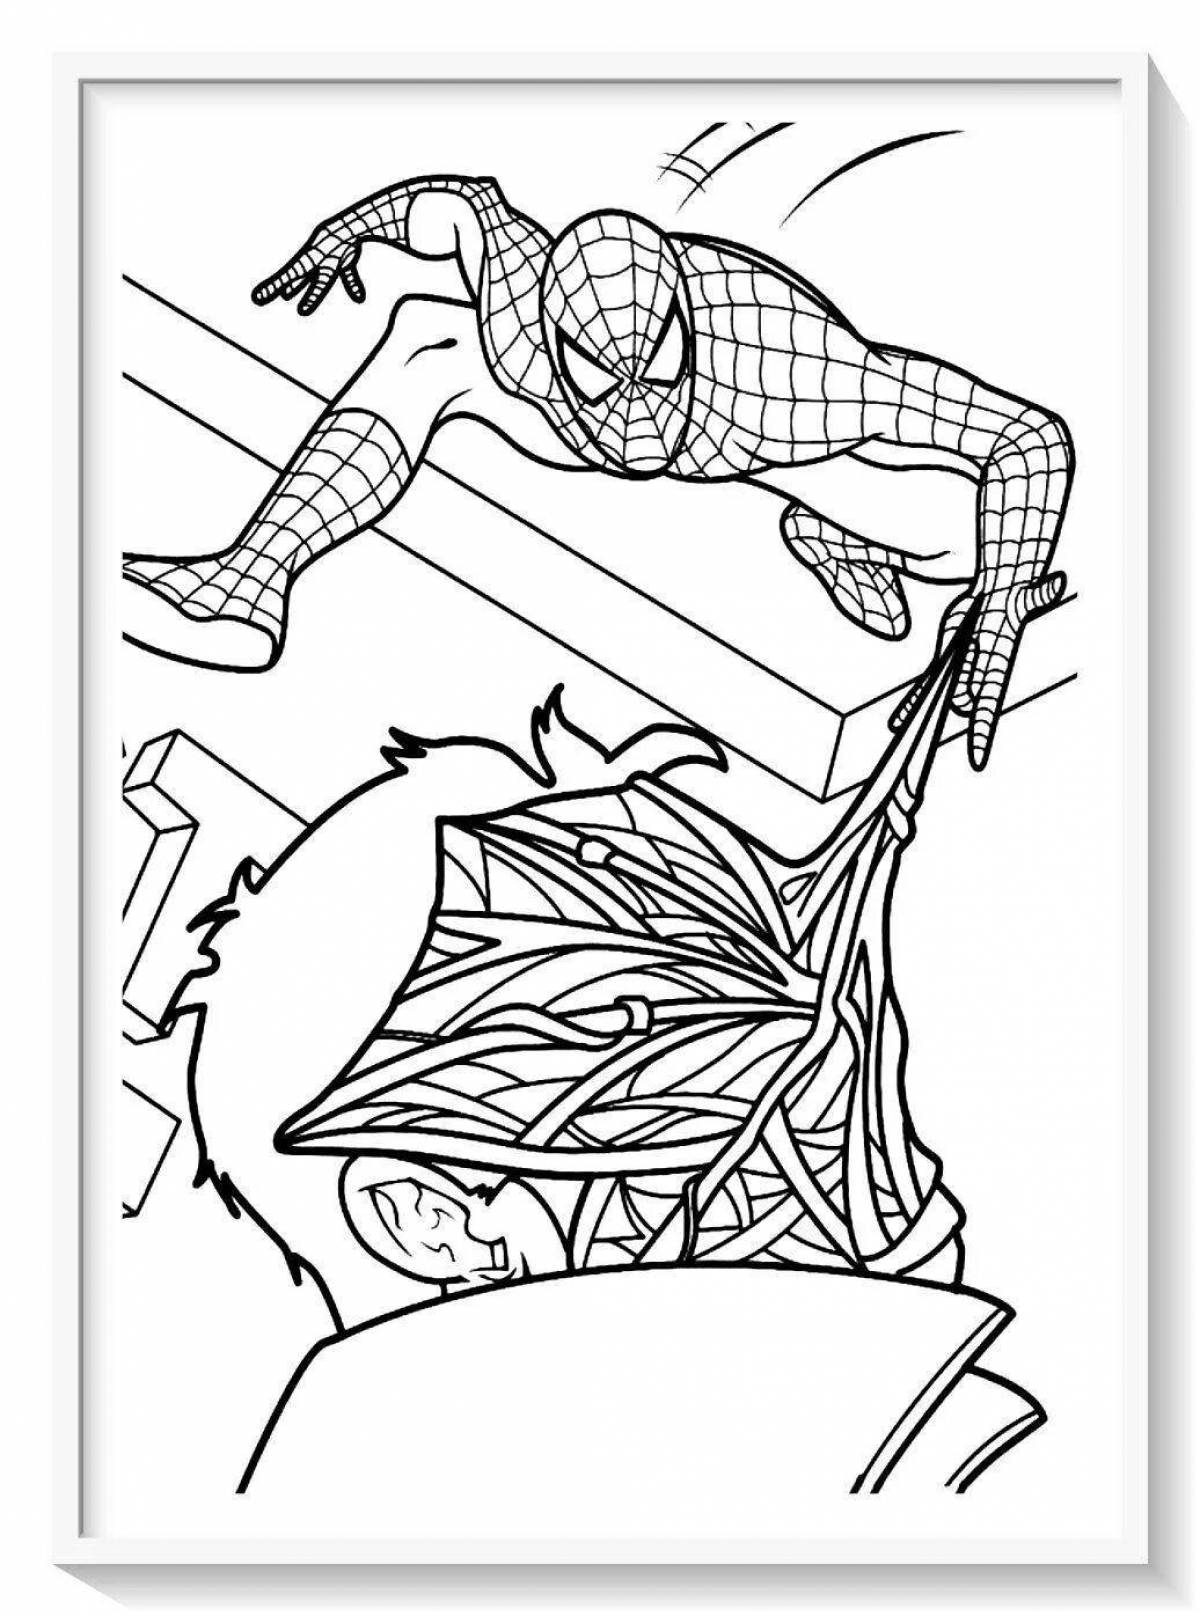 Stimulating spiderman zombie coloring page